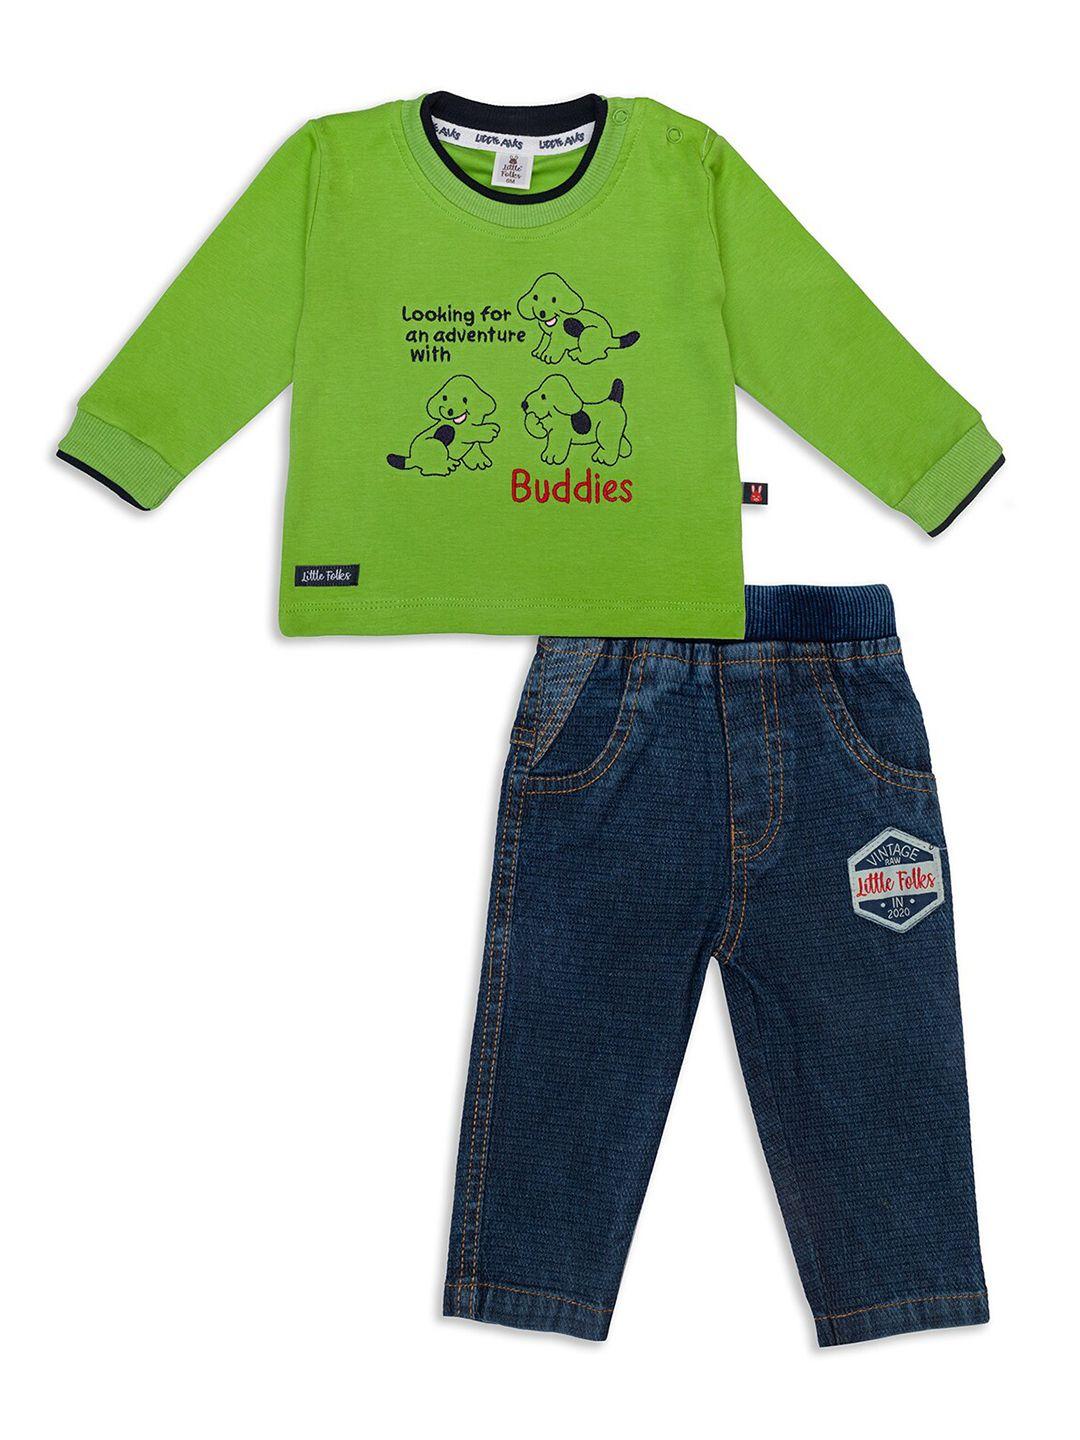 little folks unisex kids green & navy blue printed pure cotton t-shirt with trousers